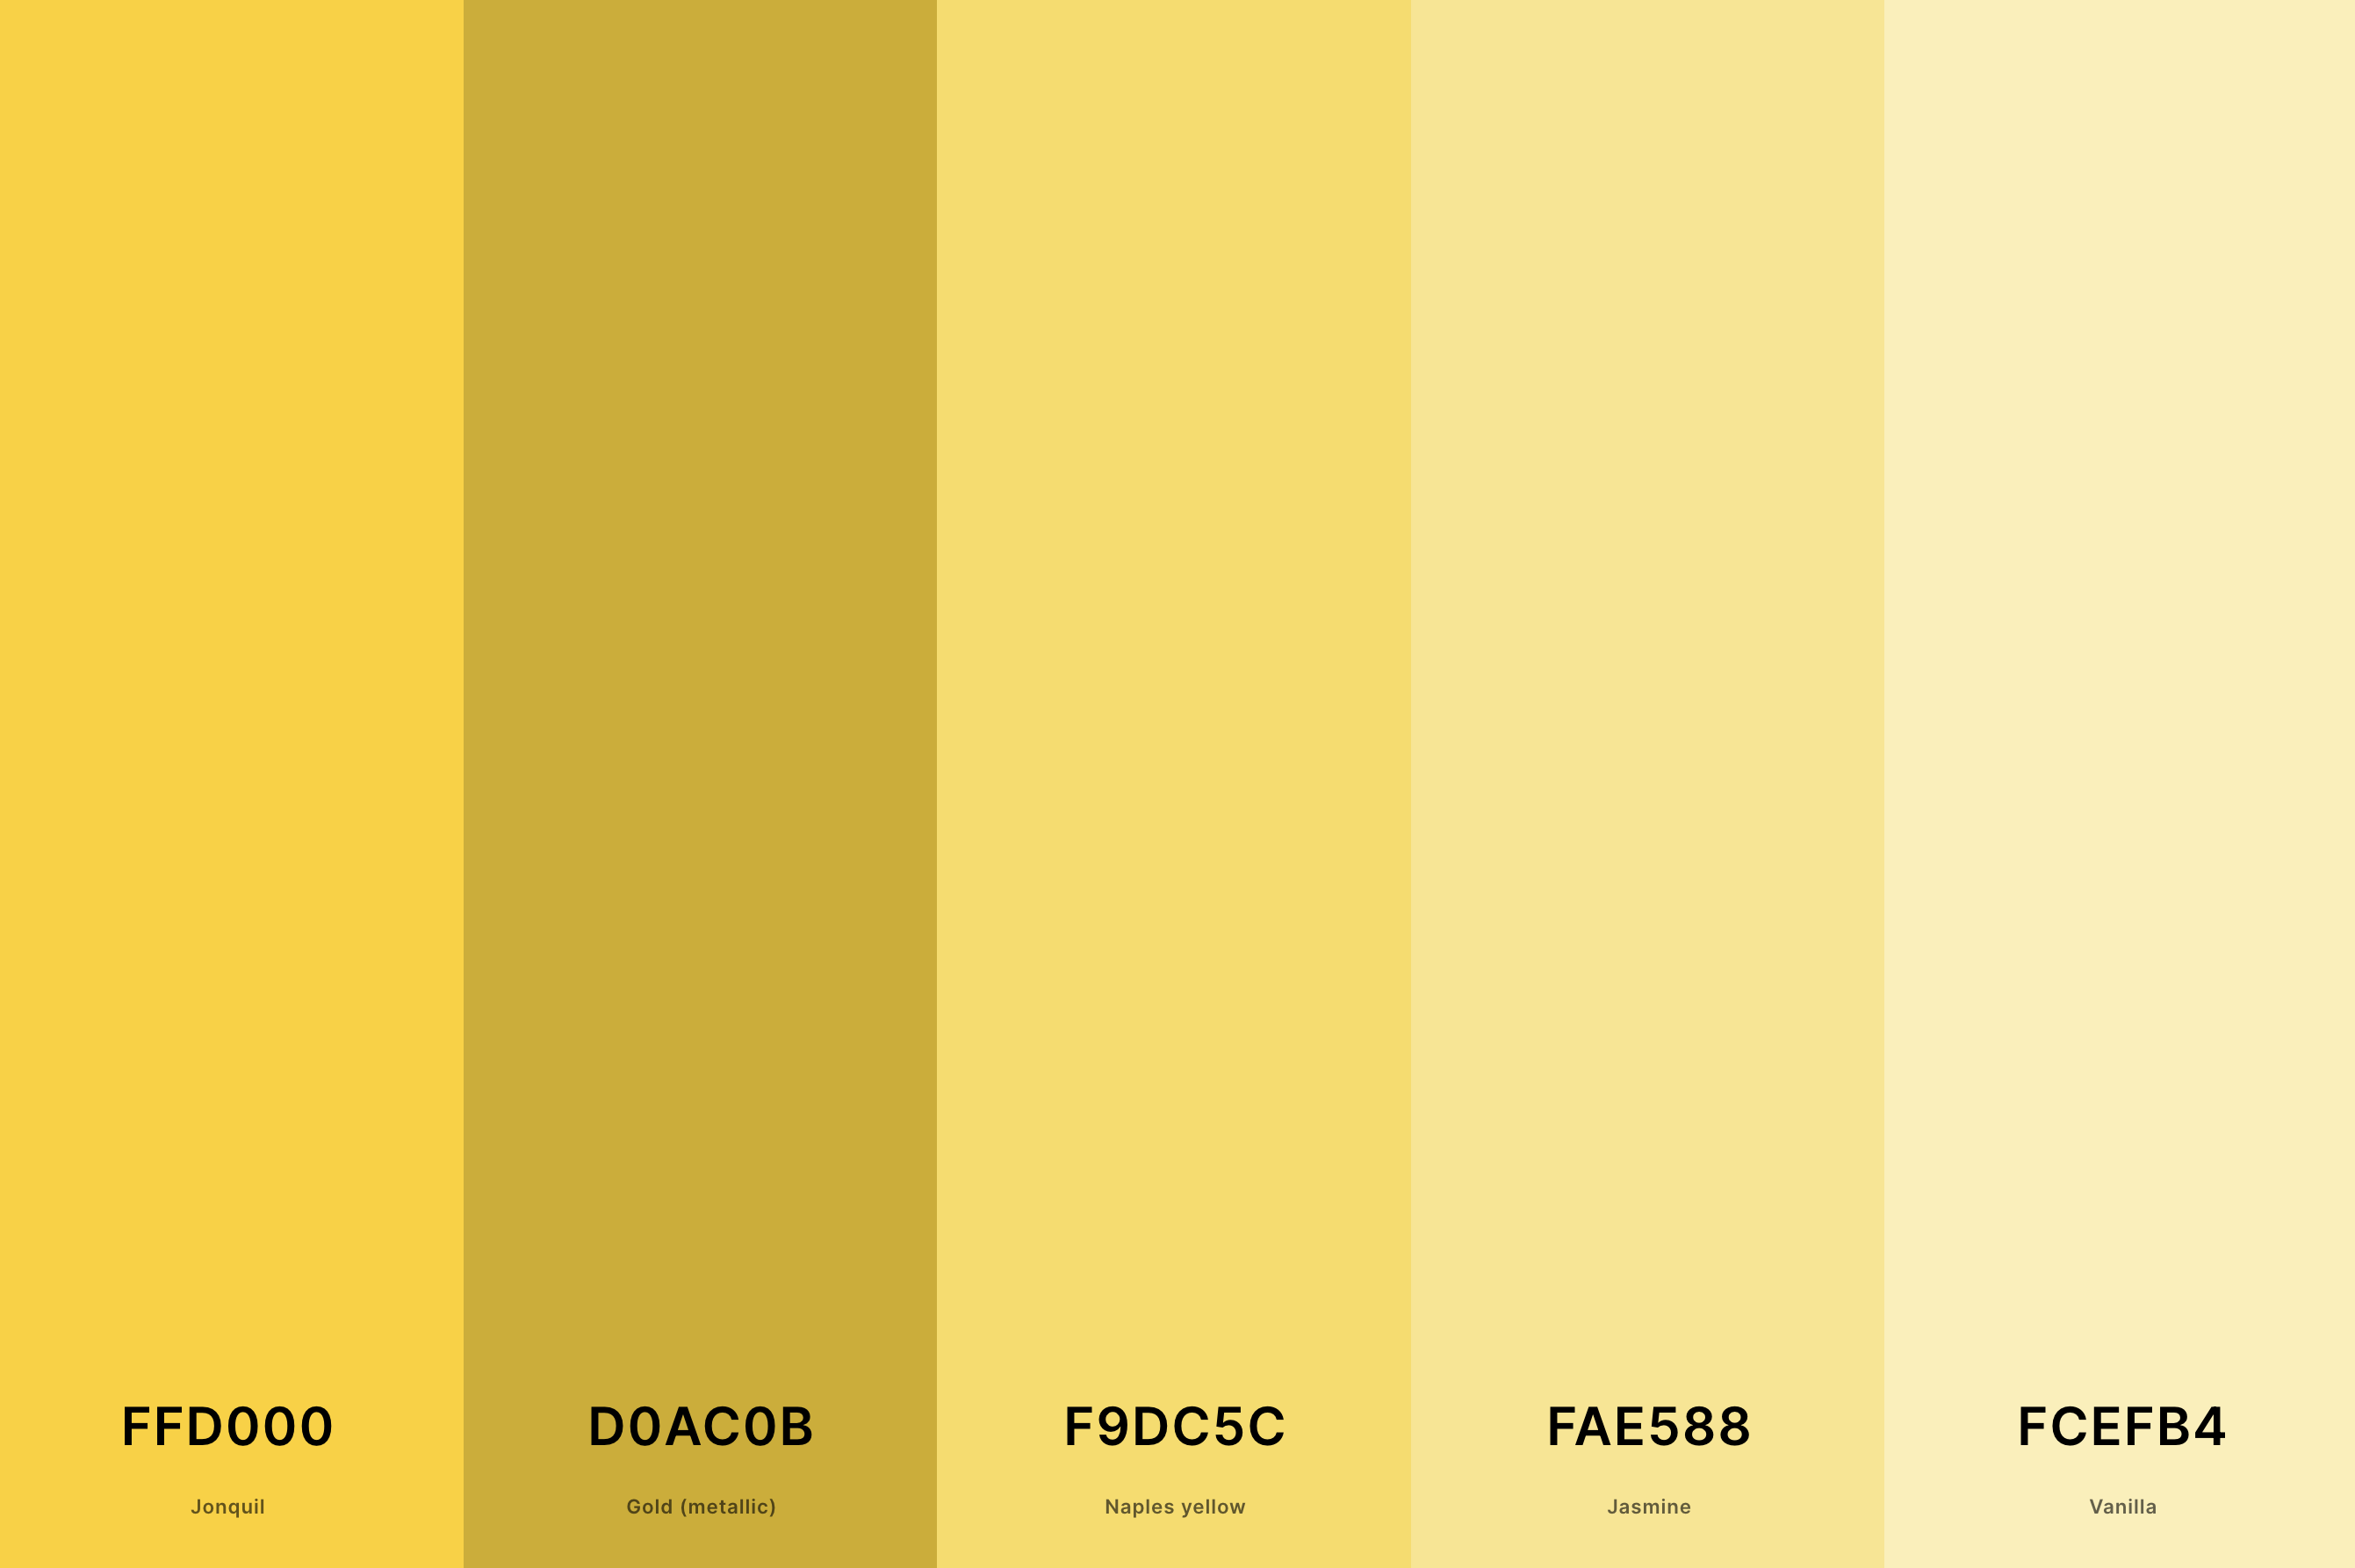 27. Yellow And Gold Color Palette Color Palette with Jonquil (Hex #FFD000) + Gold (Metallic) (Hex #D0AC0B) + Naples Yellow (Hex #F9DC5C) + Jasmine (Hex #FAE588) + Vanilla (Hex #FCEFB4) Color Palette with Hex Codes